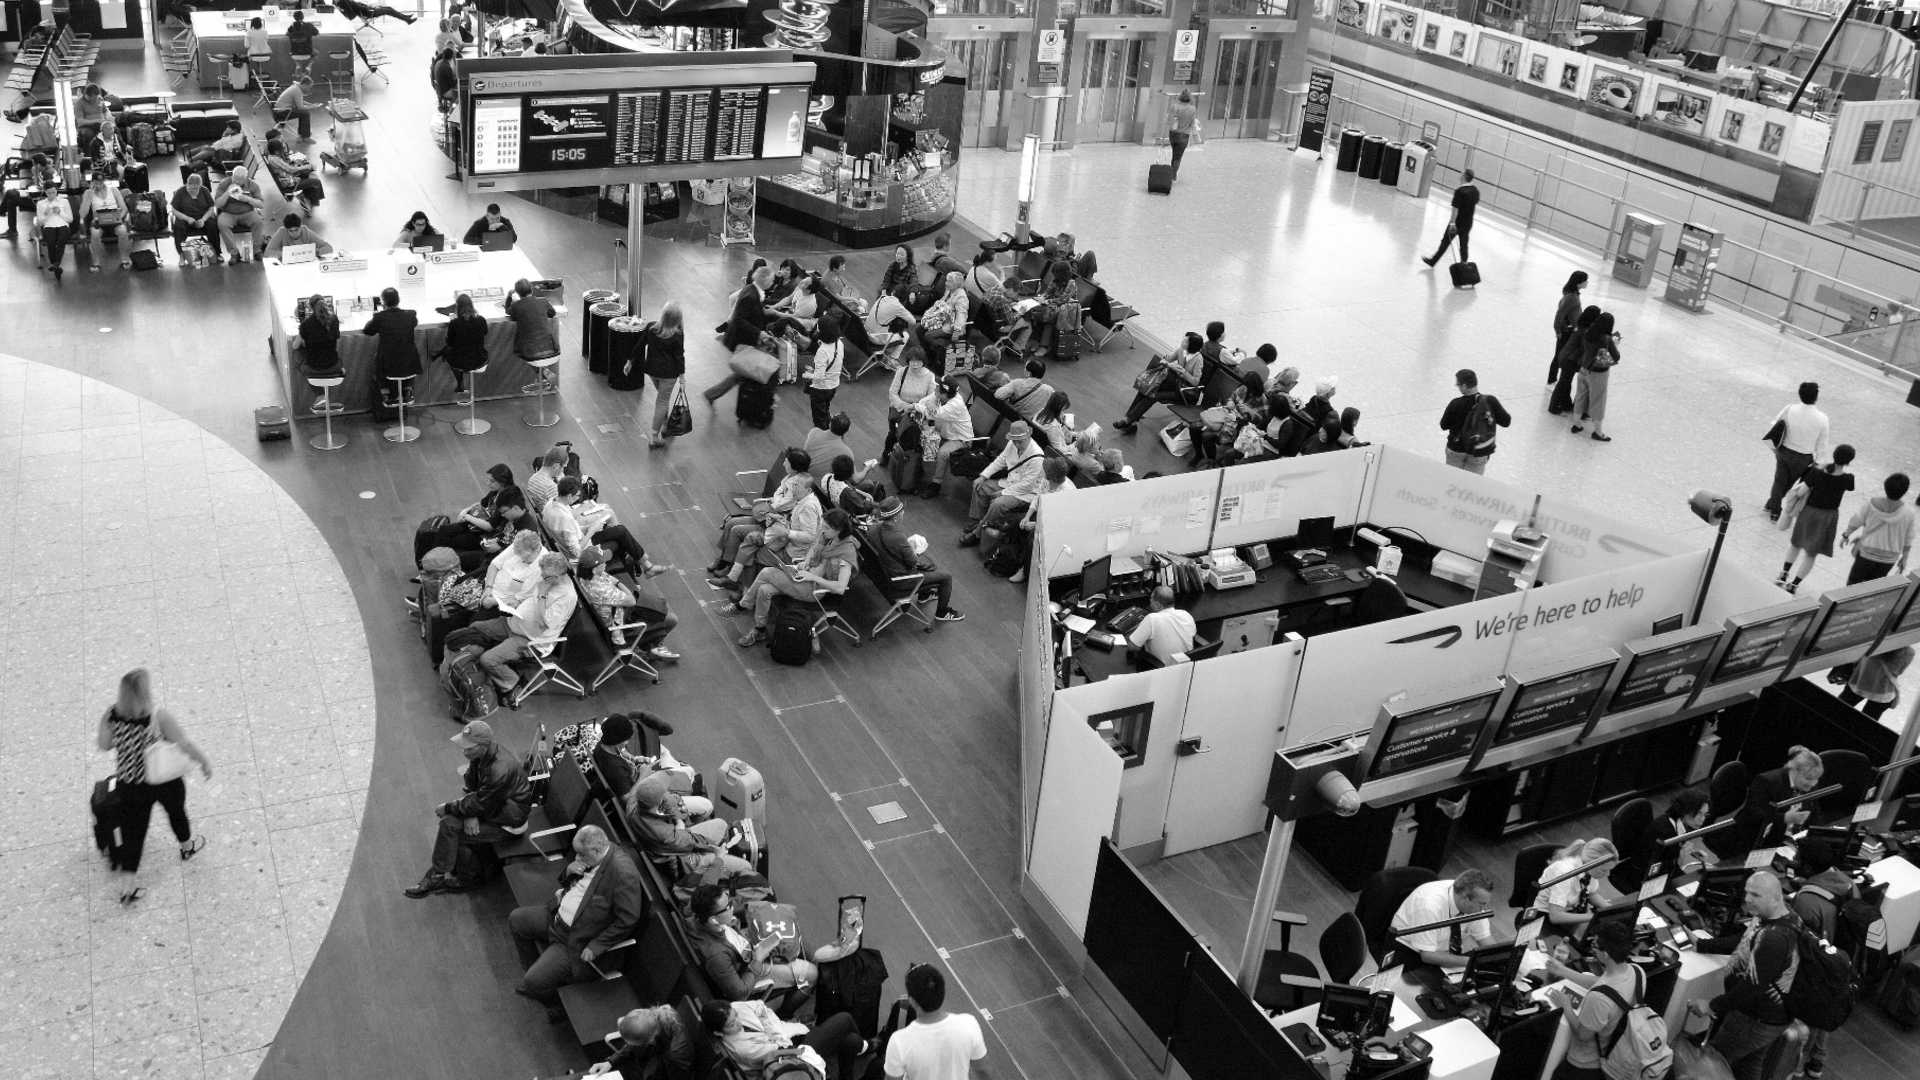 "Heathrow Terminal 5A departures" by Mike McBey, used under CC BY 2.0 / Cropped, desaturated and resampled from original